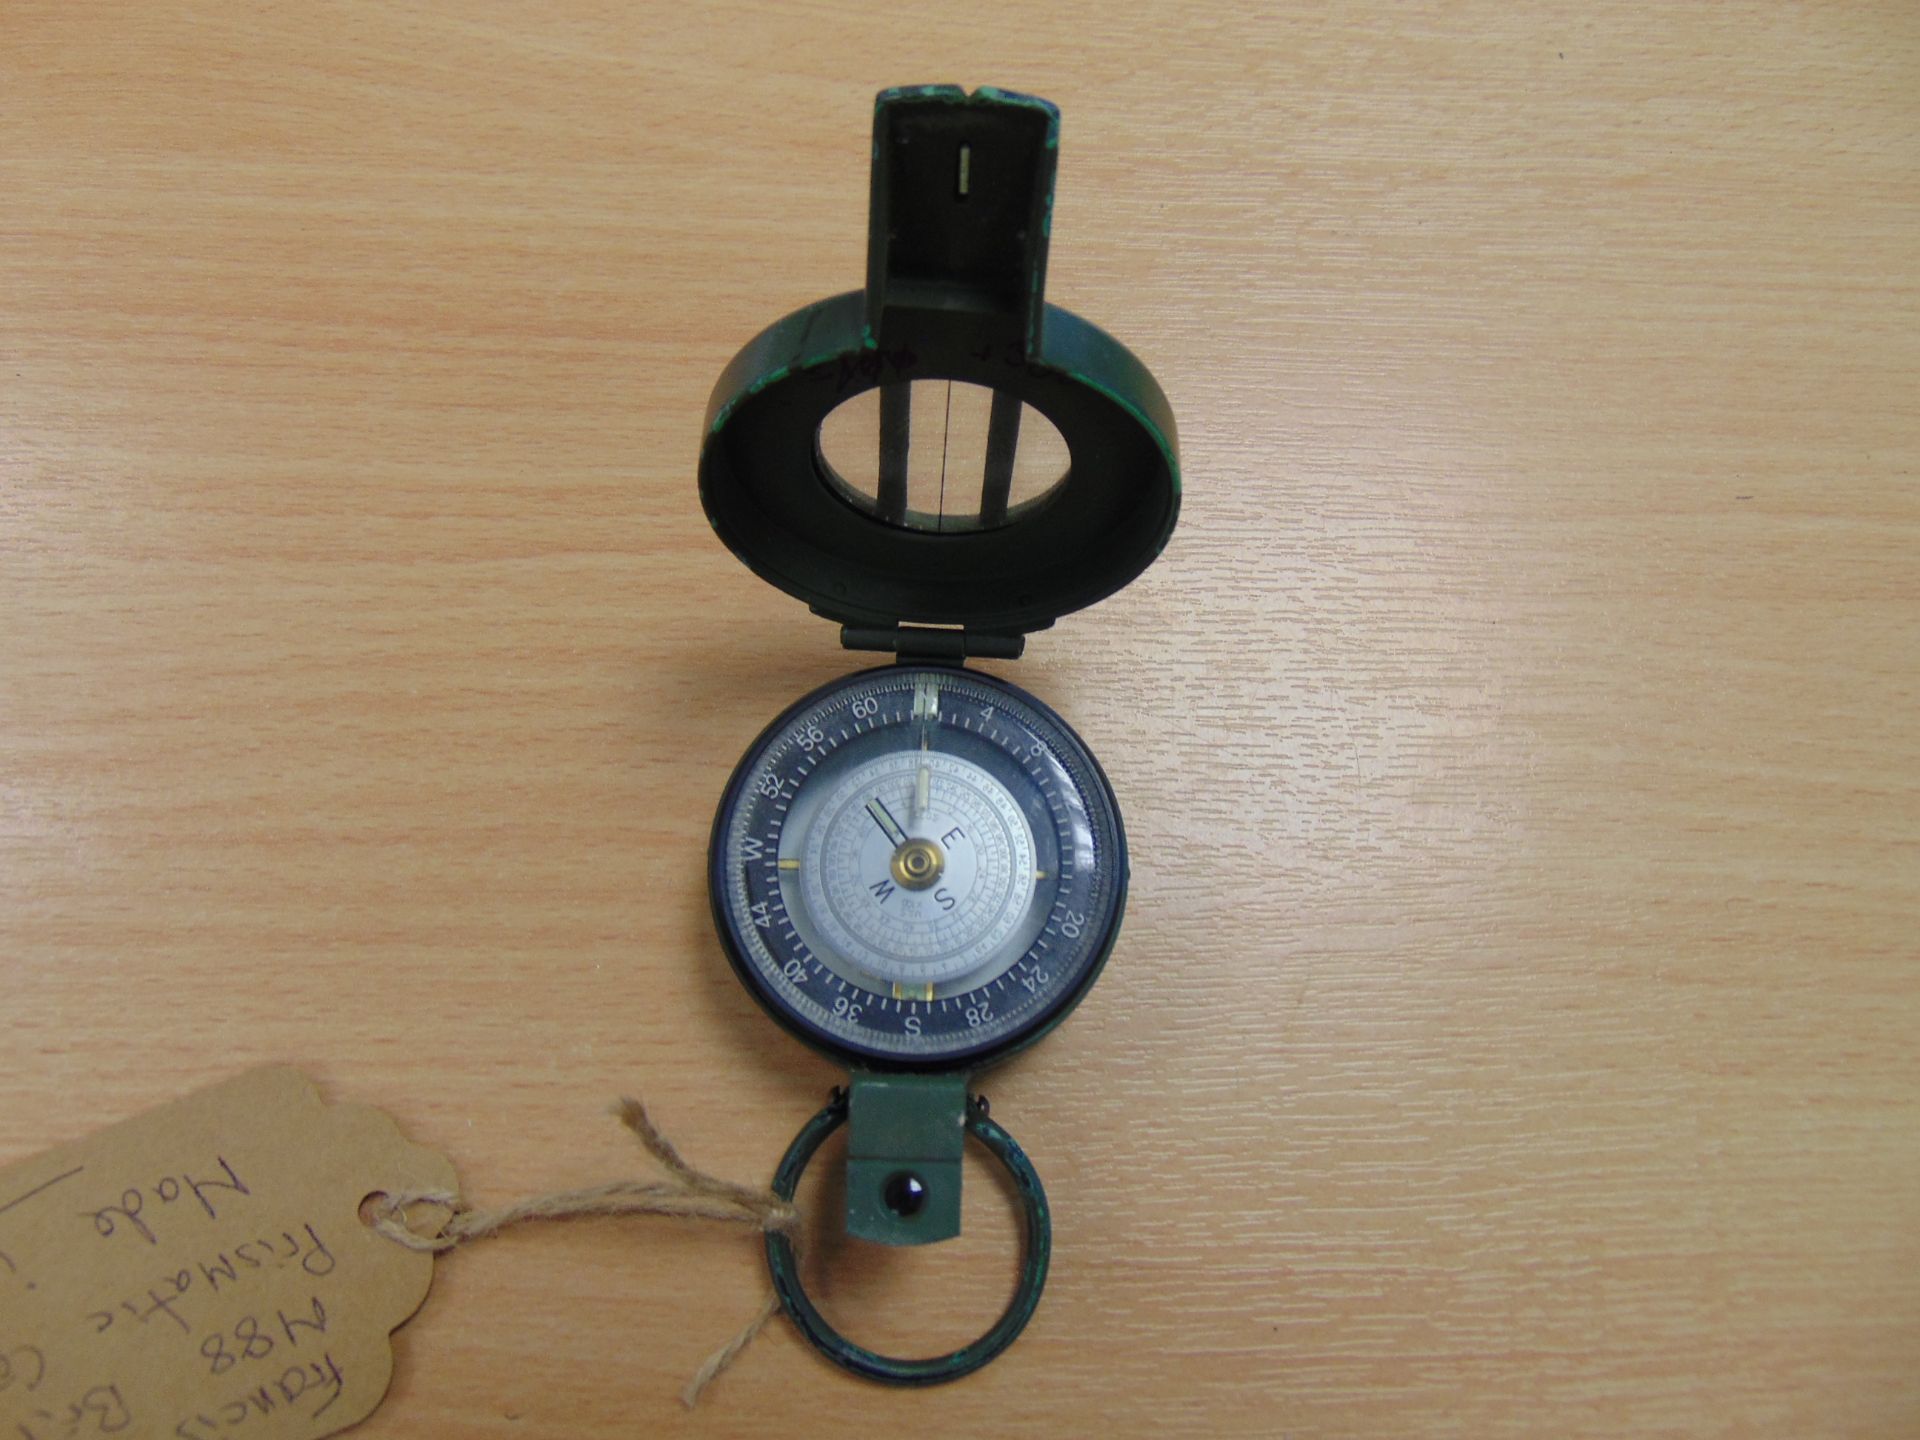 Francis Baker M88 British Army Prismatic Compass, Made in UK - Image 2 of 3